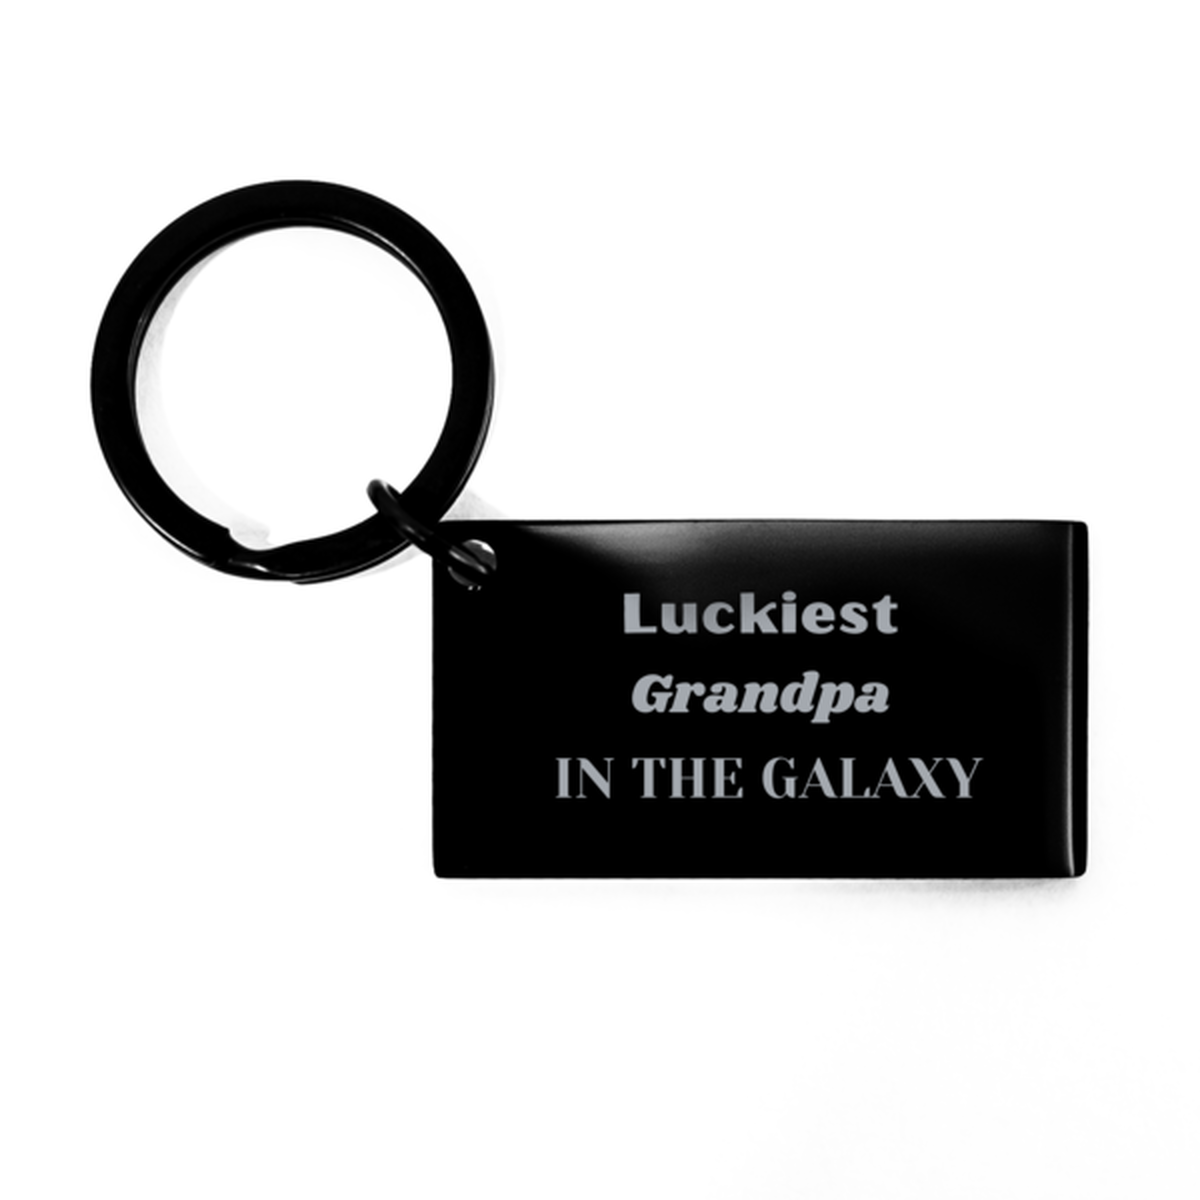 Luckiest Grandpa in the Galaxy, To My Grandpa Engraved Gifts, Christmas Grandpa Keychain Gifts, X-mas Birthday Unique Gifts For Grandpa Men Women